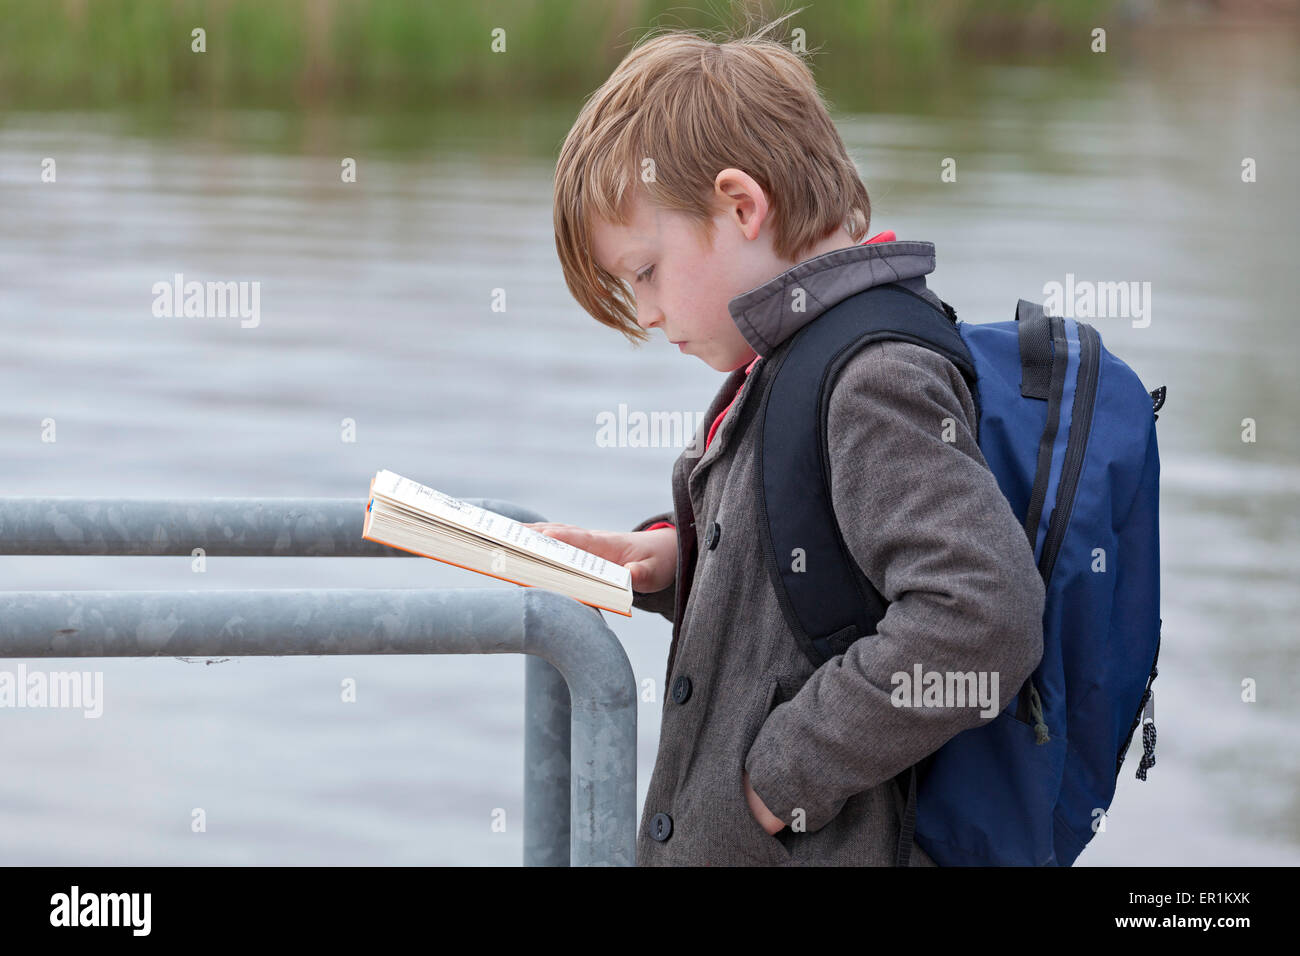 young boy reading a book while waiting for a boat Stock Photo